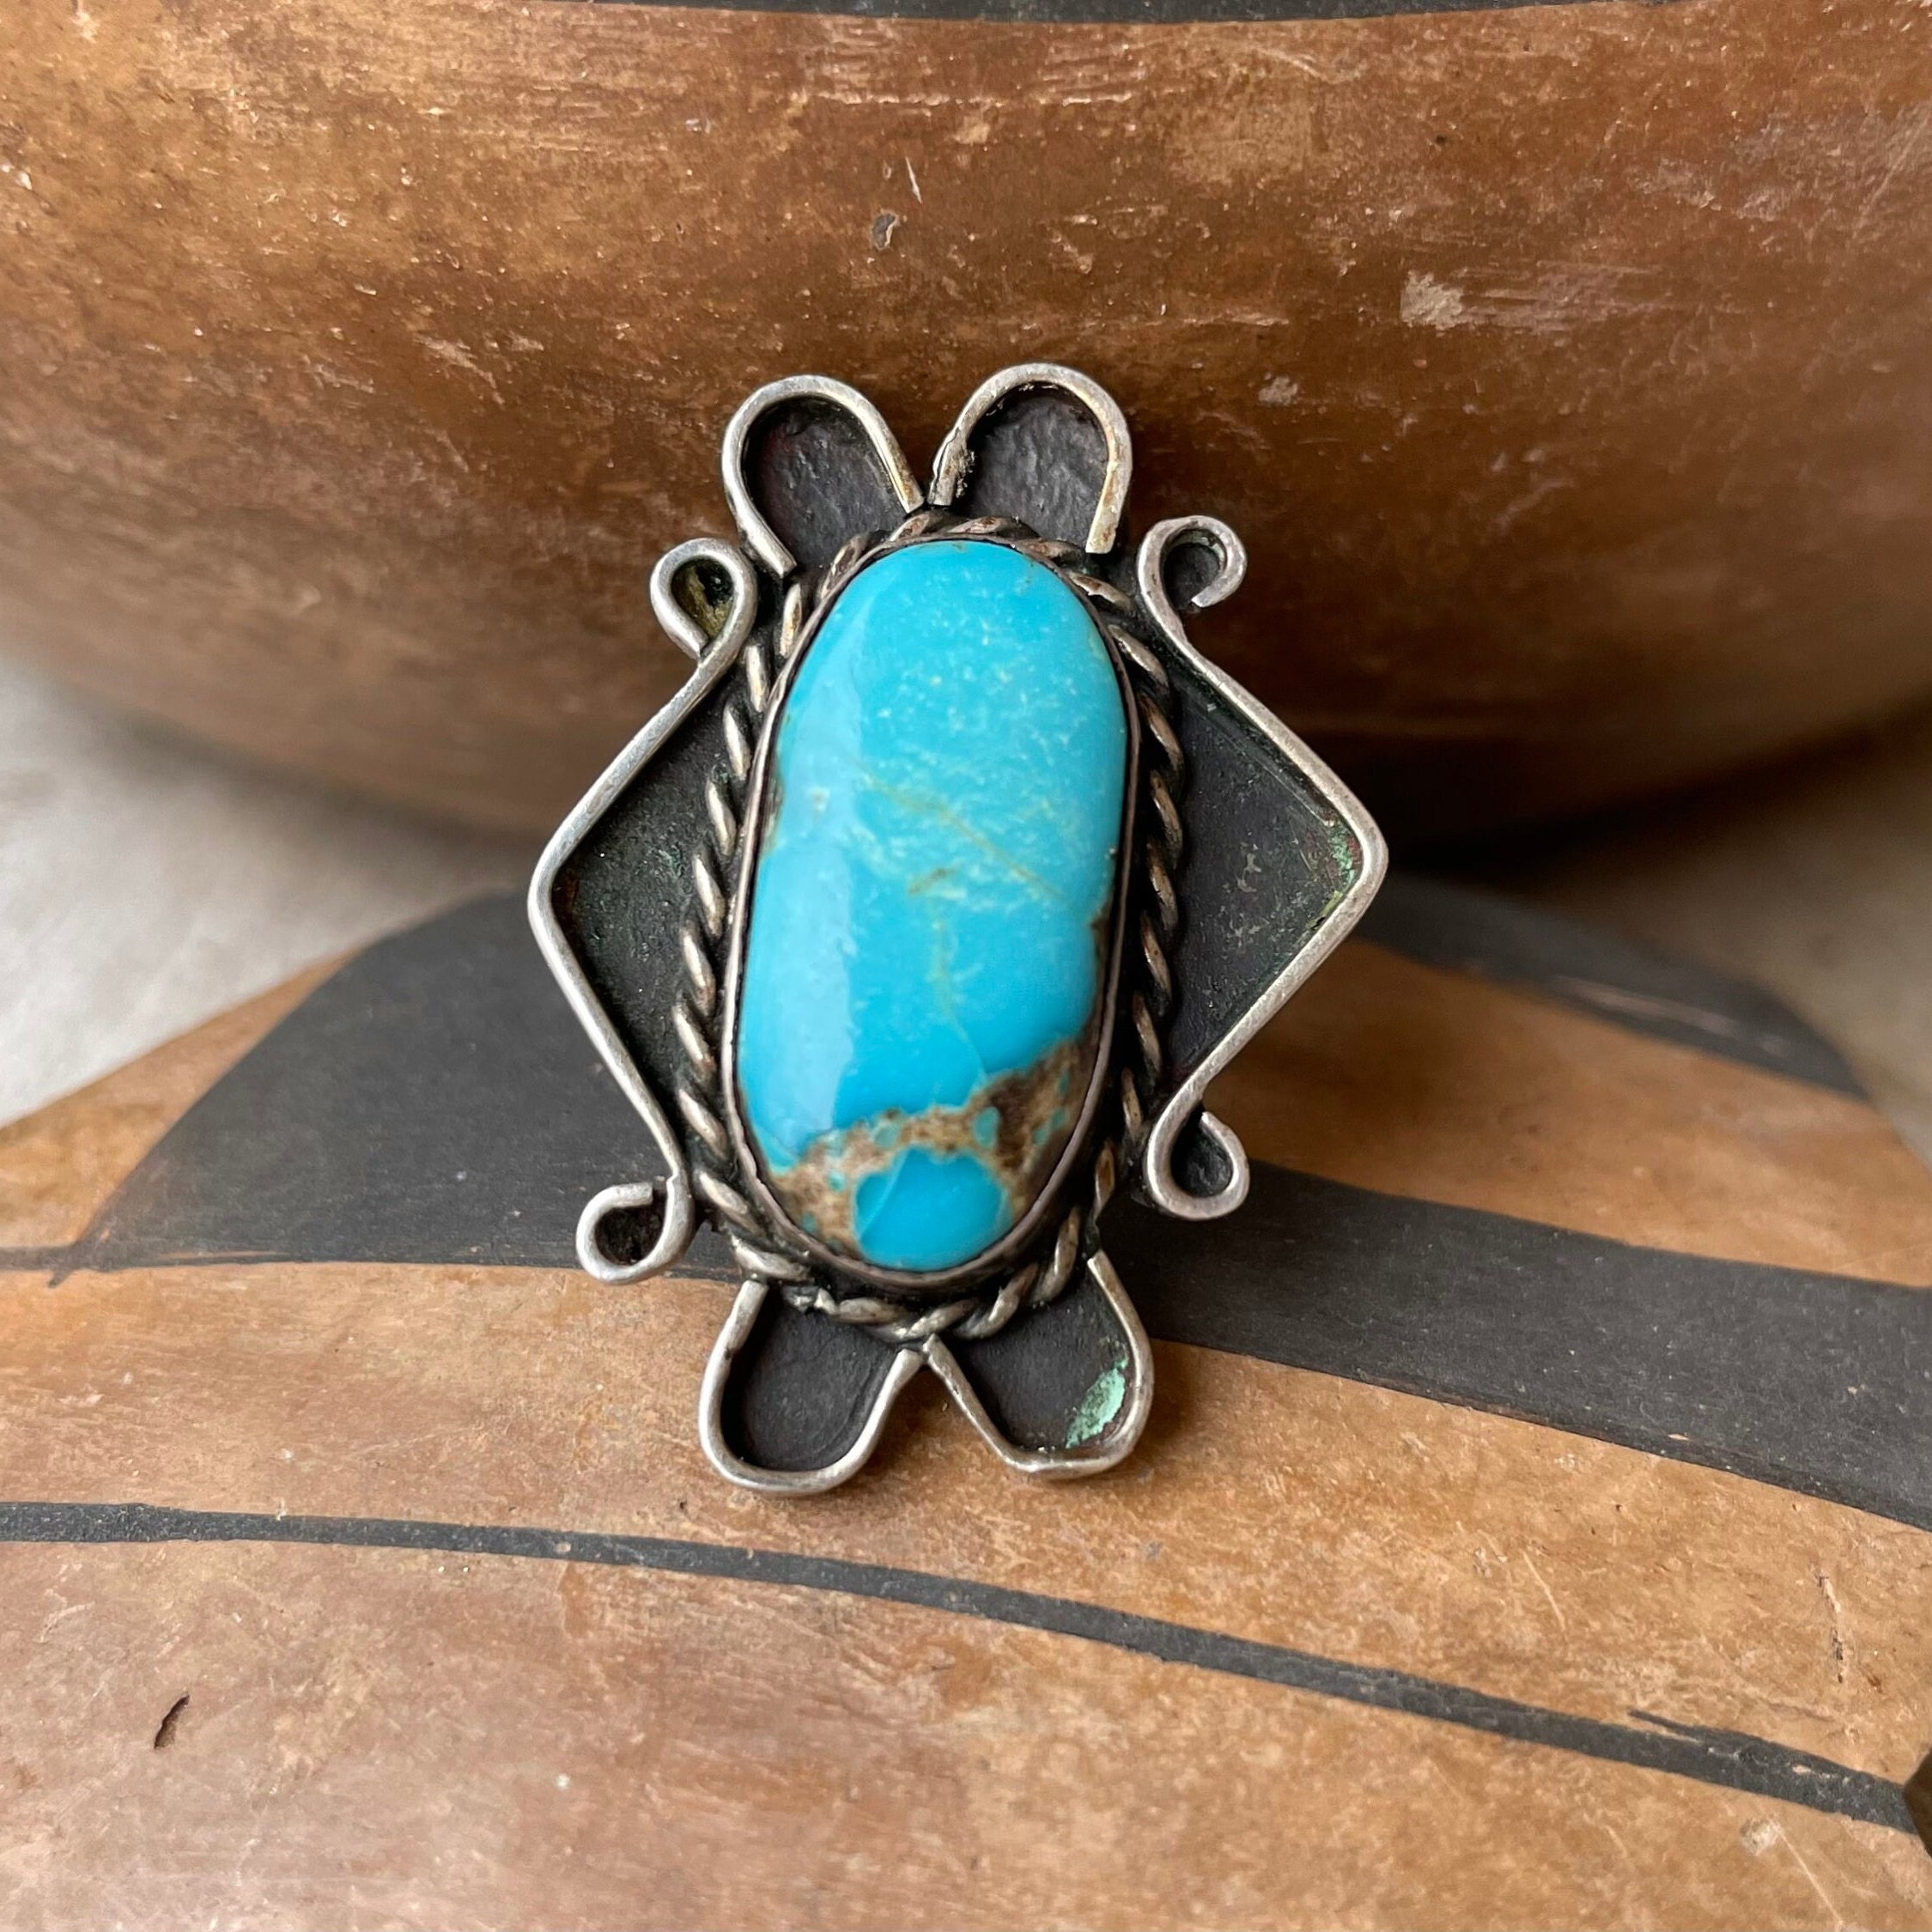 Traditional Navajo Turquoise Ring Size 3, Vintage Native American